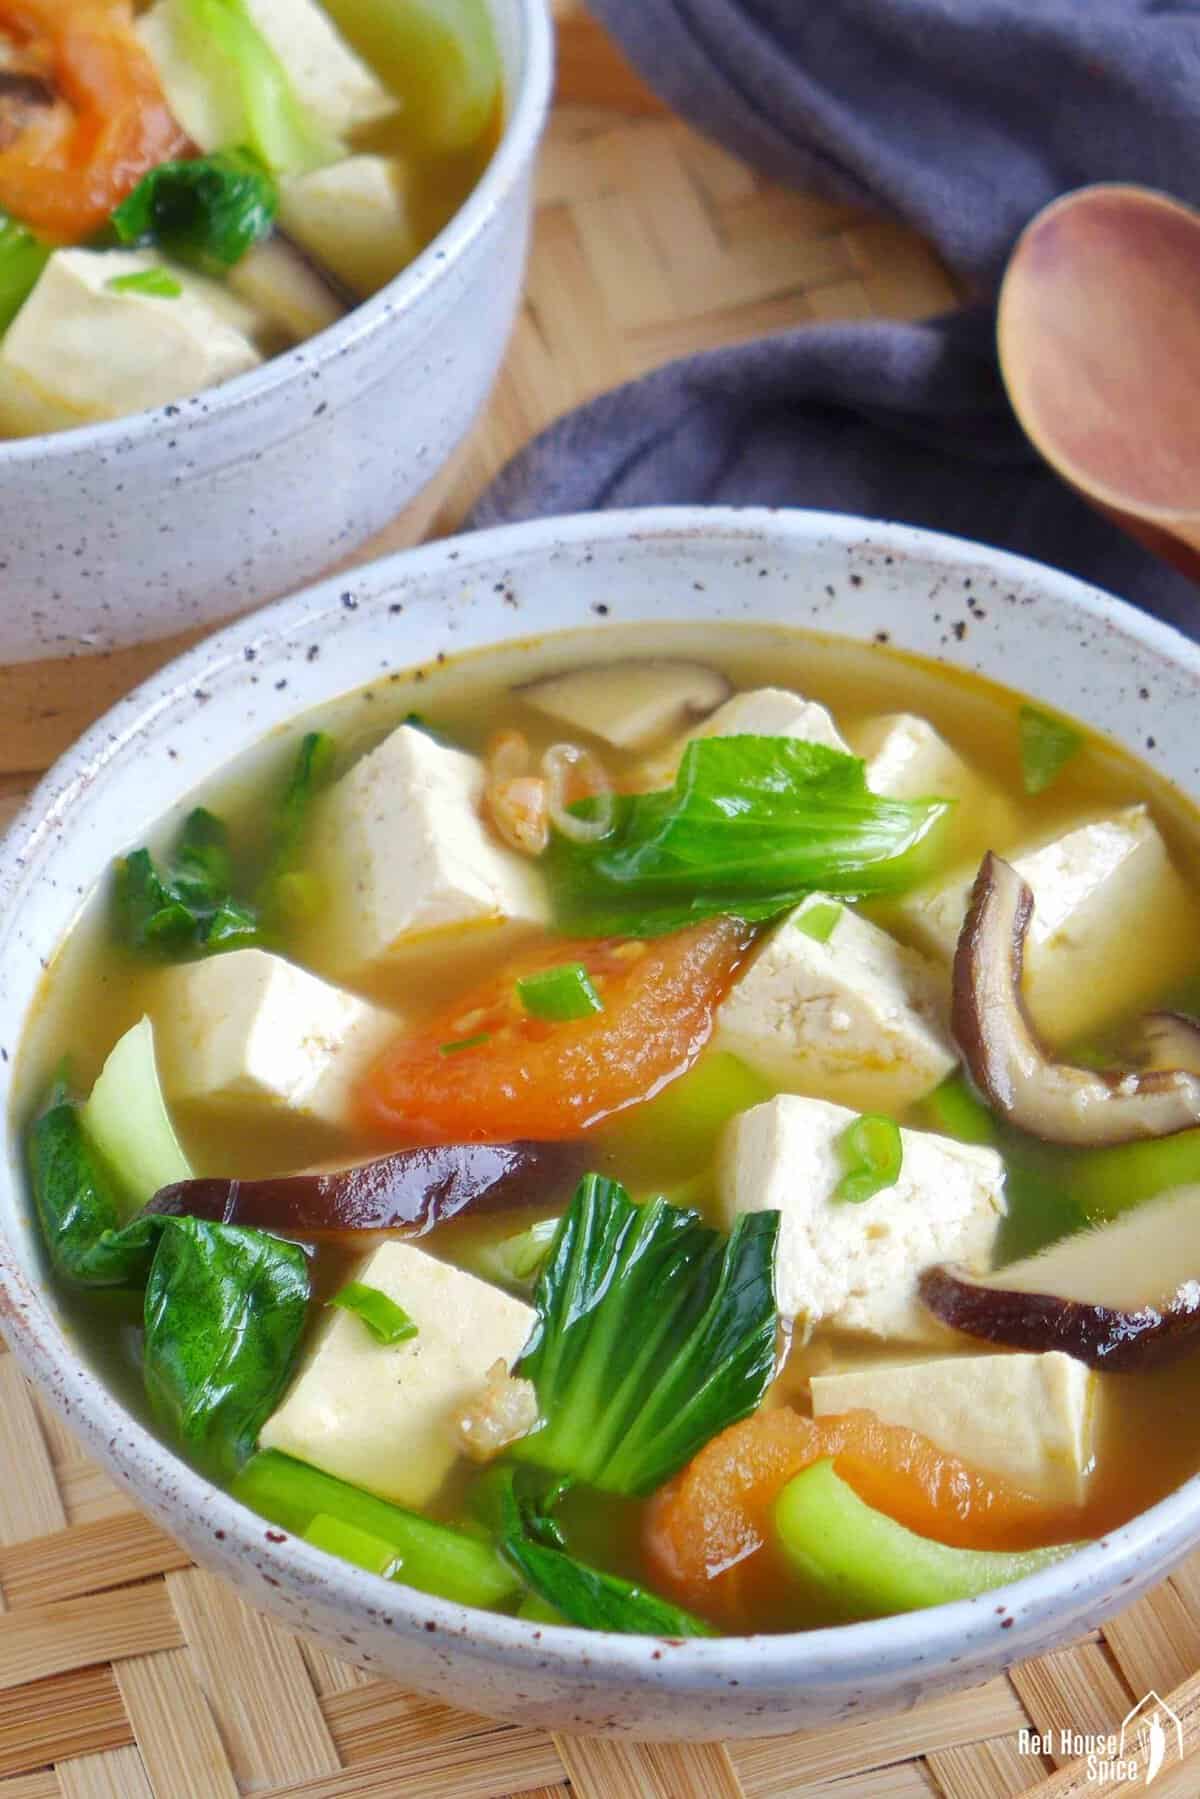 Tofu Soup With Vegetables 豆腐鲜蔬汤